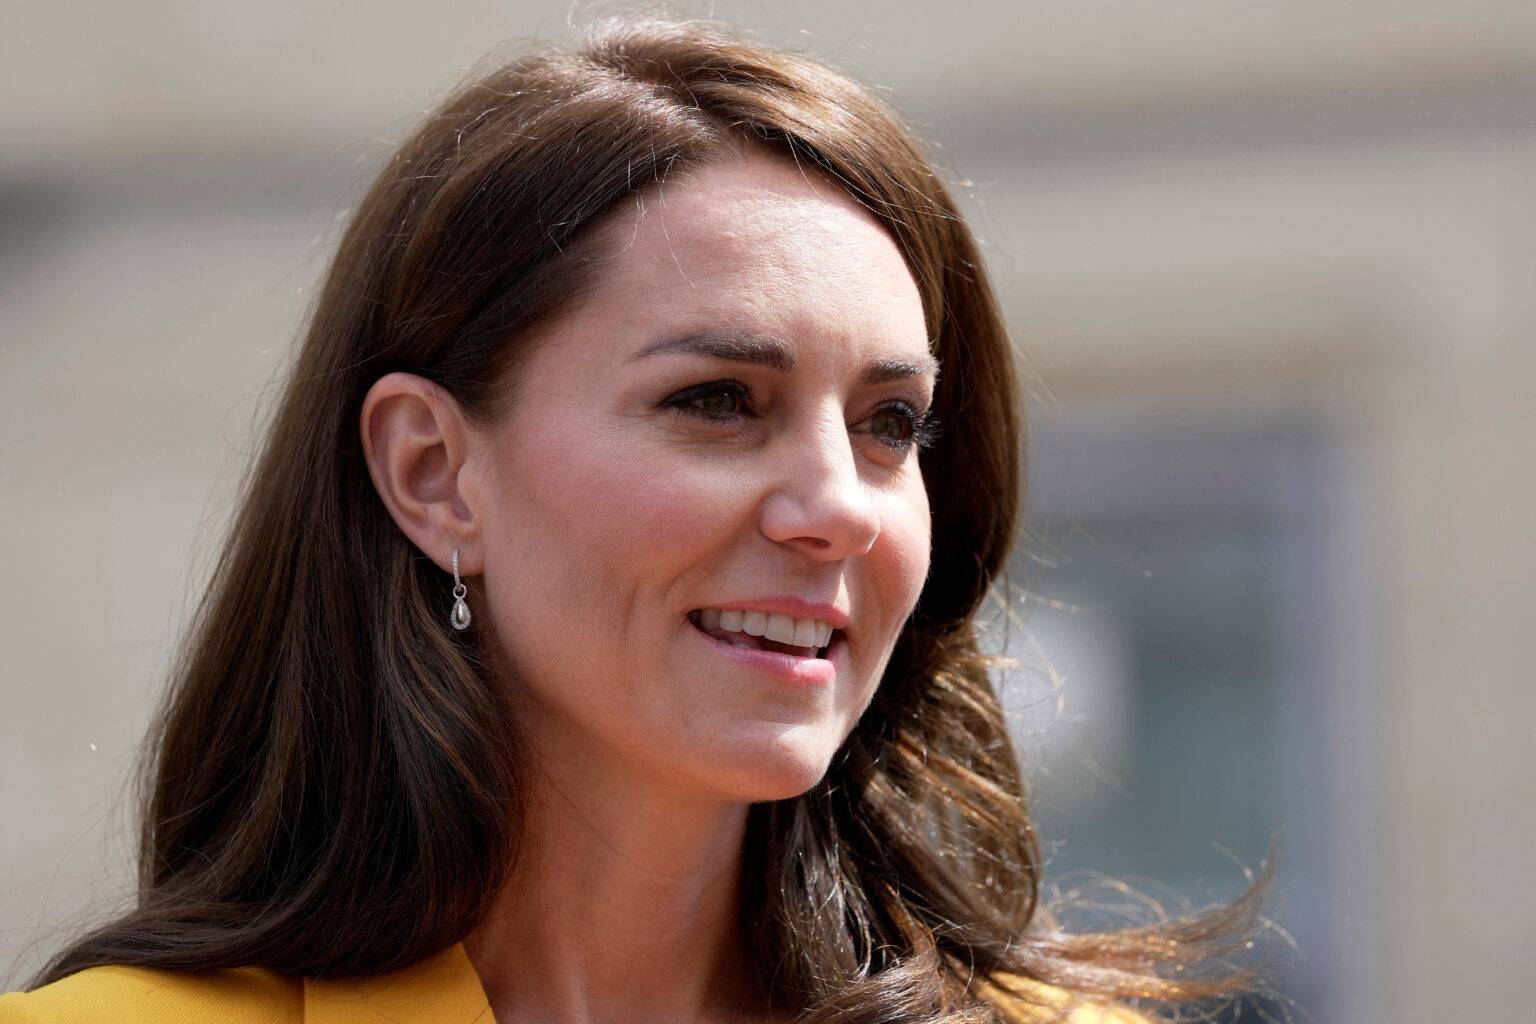 Kate medical records breach & royal conspiracy theories swirl – Paper Talk